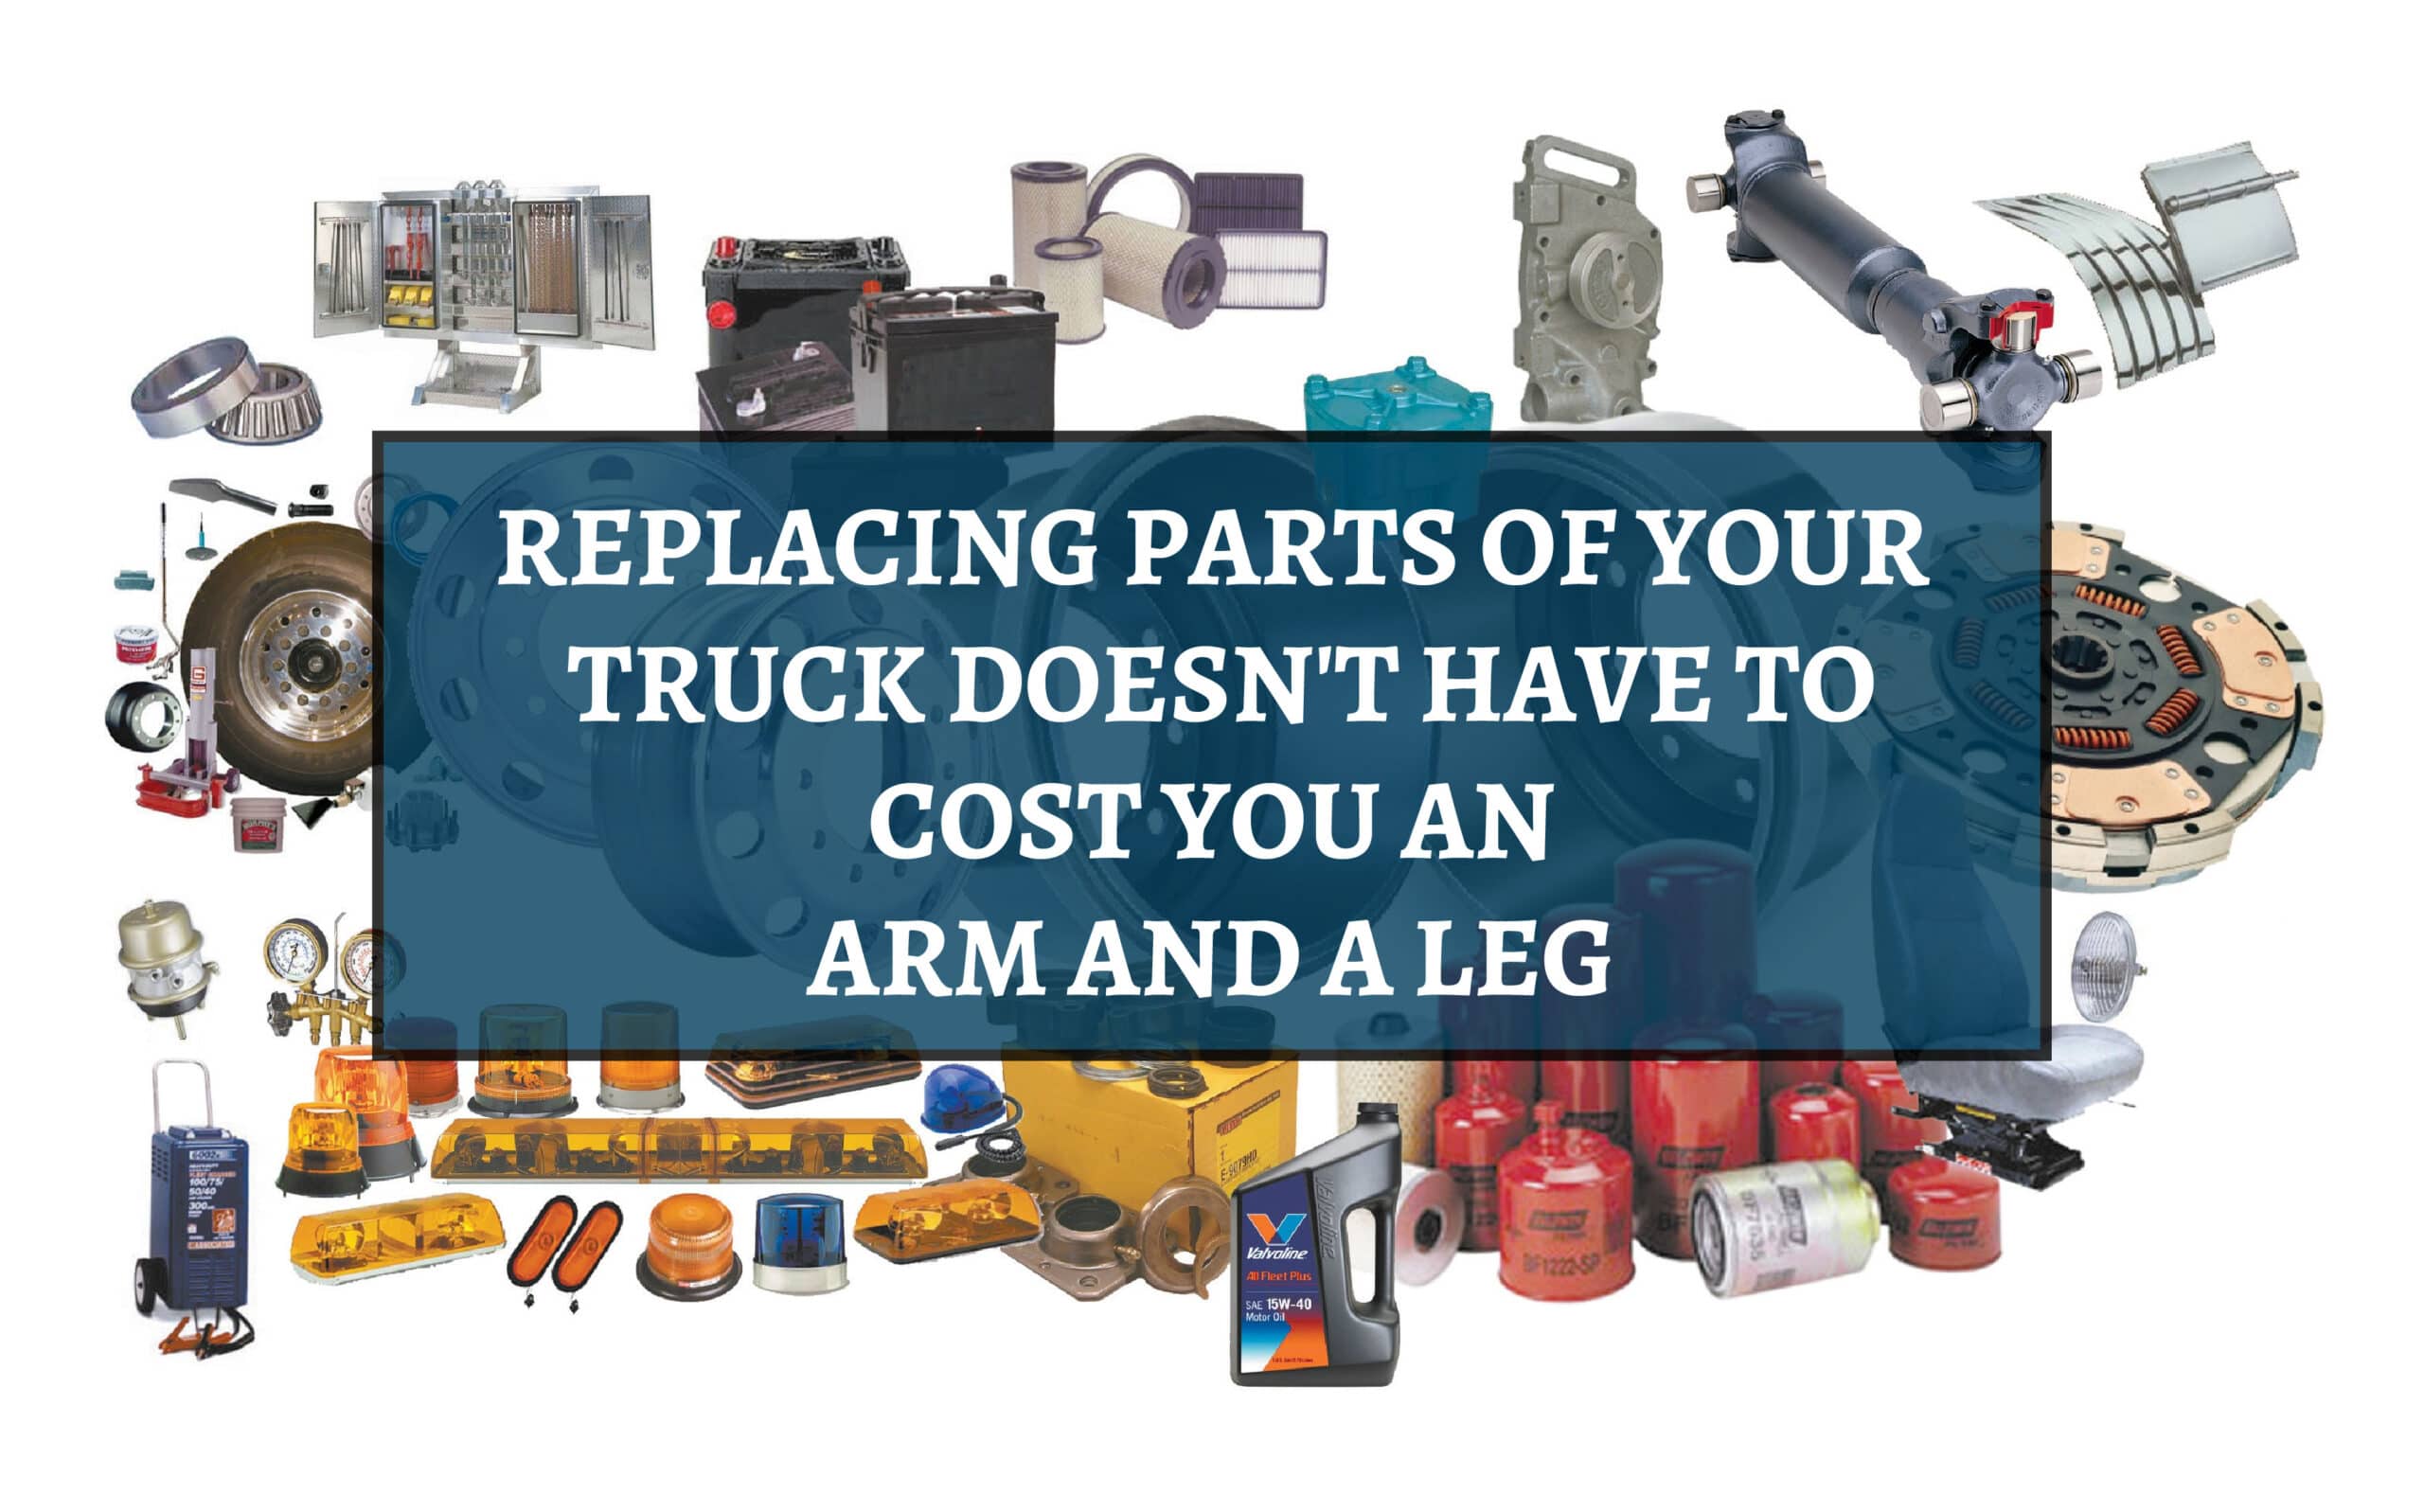 Replacing Parts of Your Truck Doesn't Have to Cost You an Arm and Leg